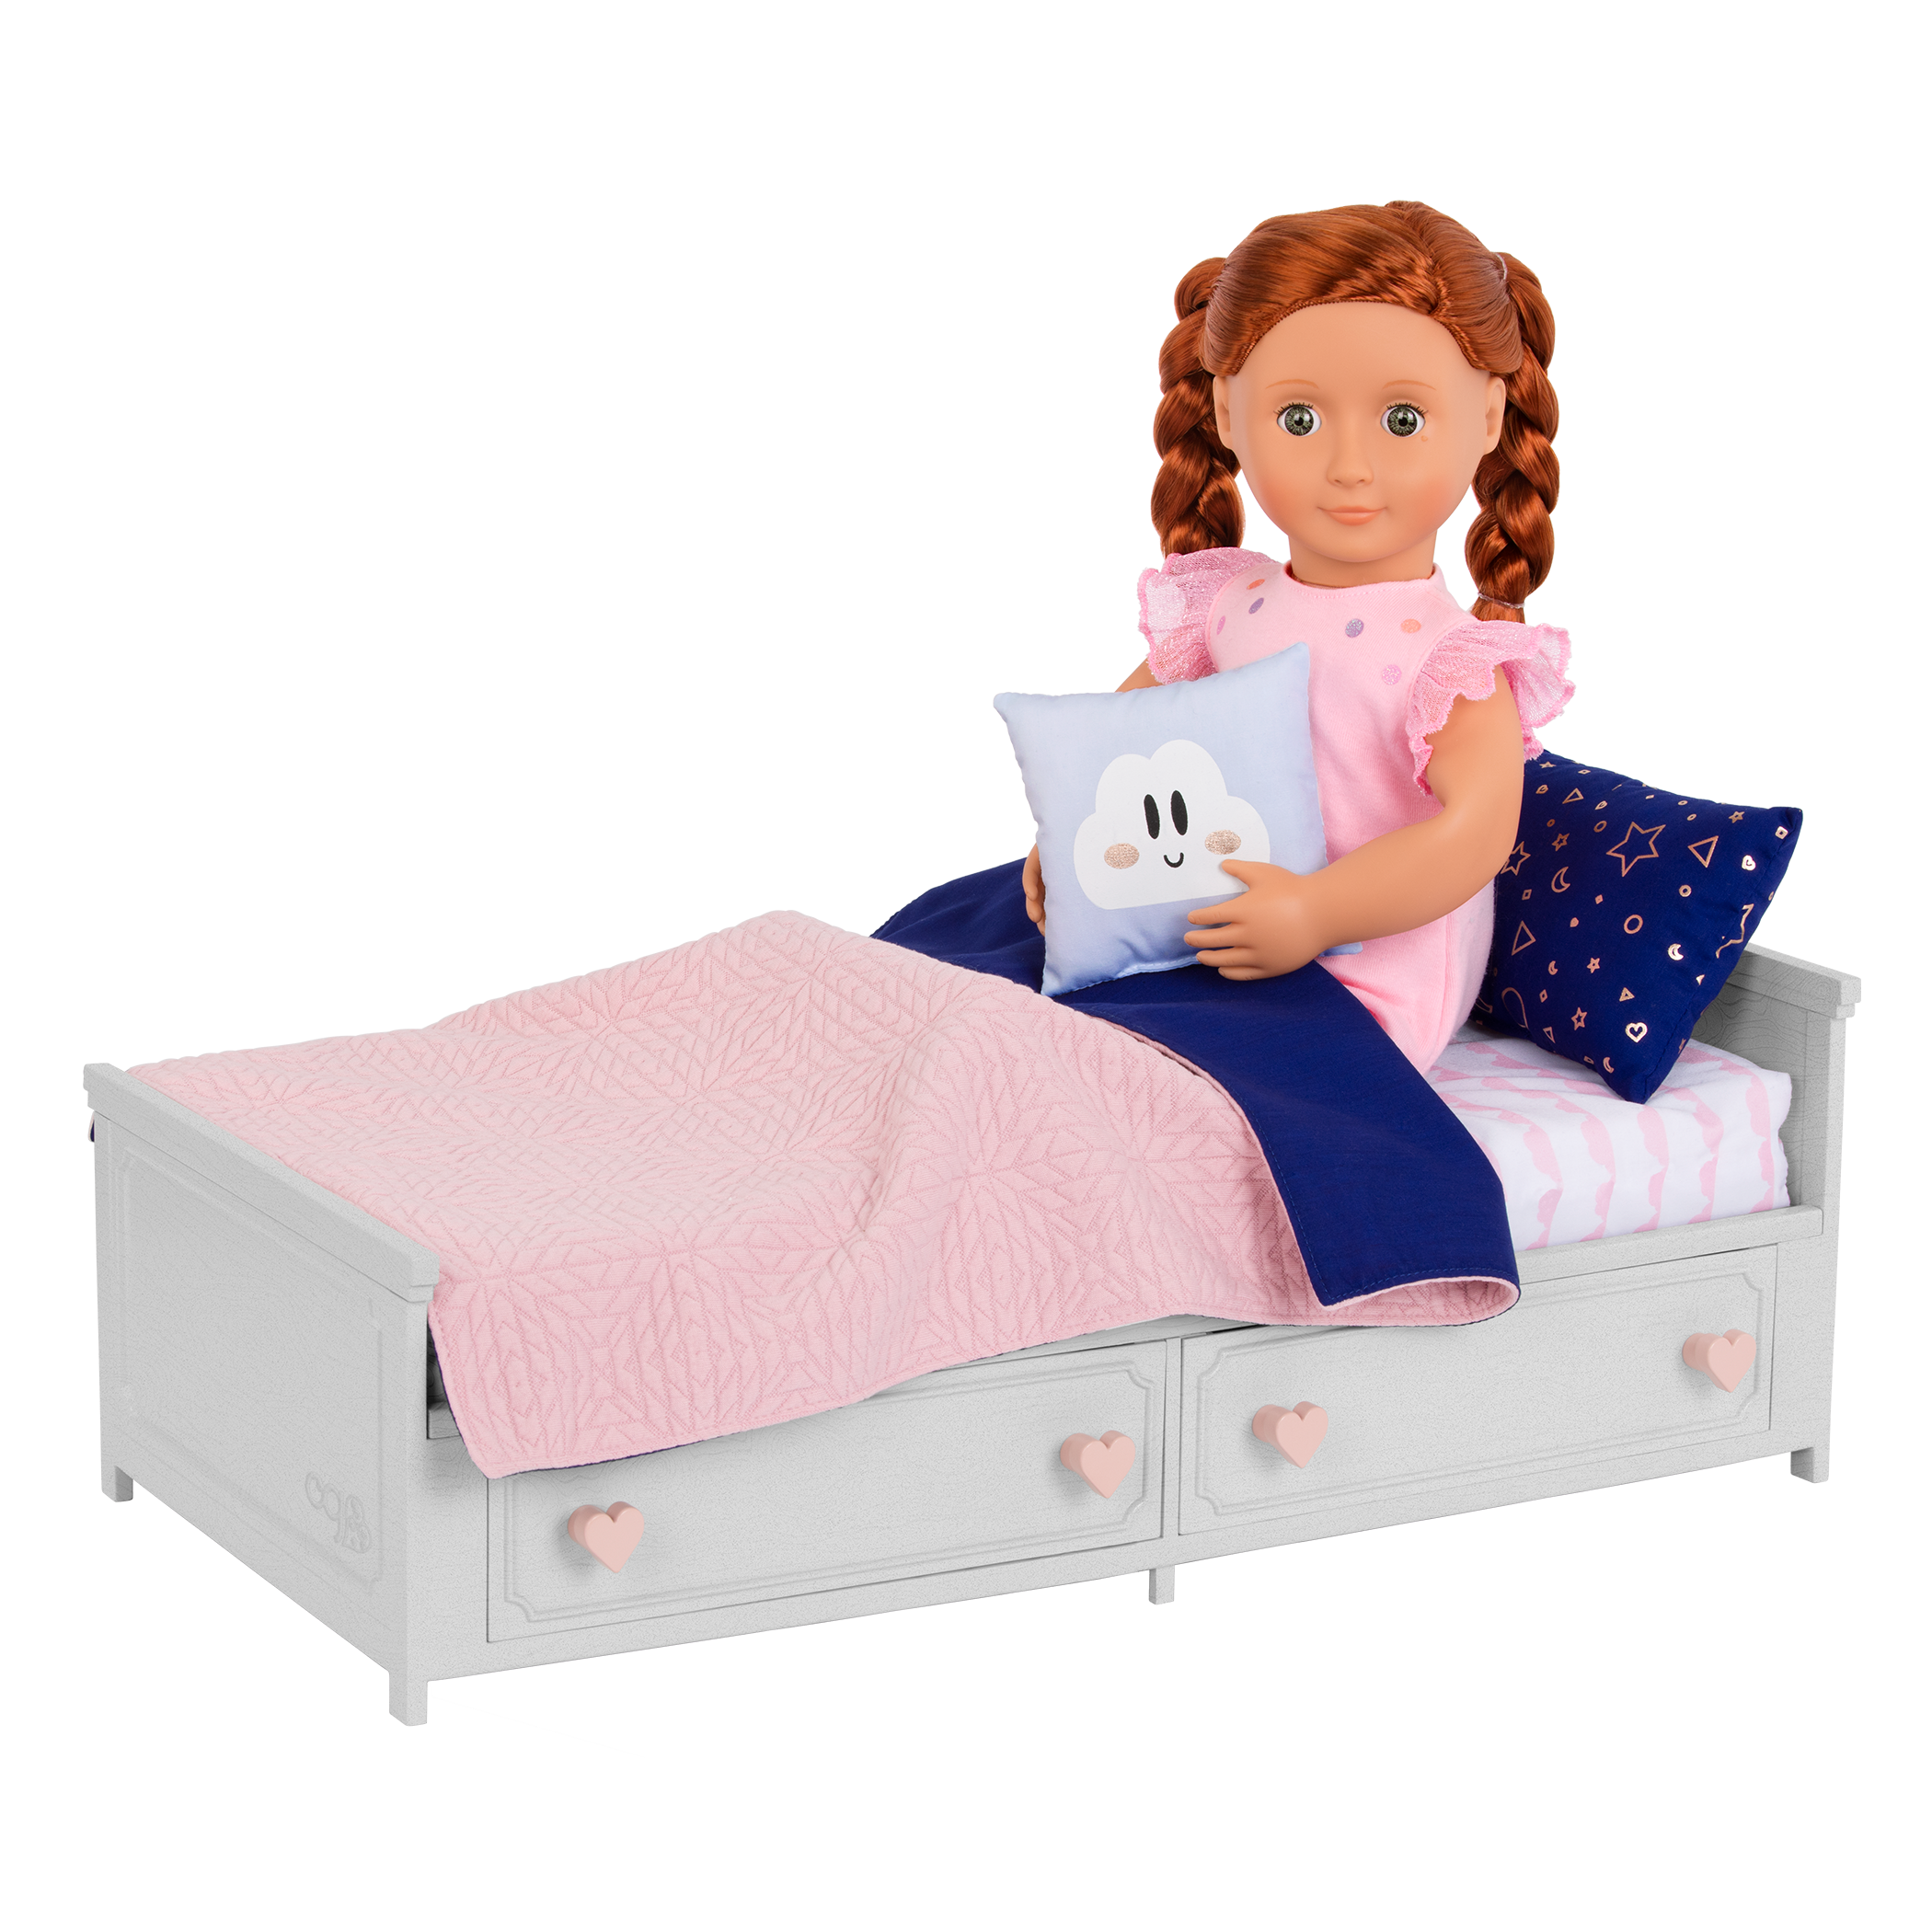 Our Generation Starry Slumbers Platform Bed for 18-inch Dolls